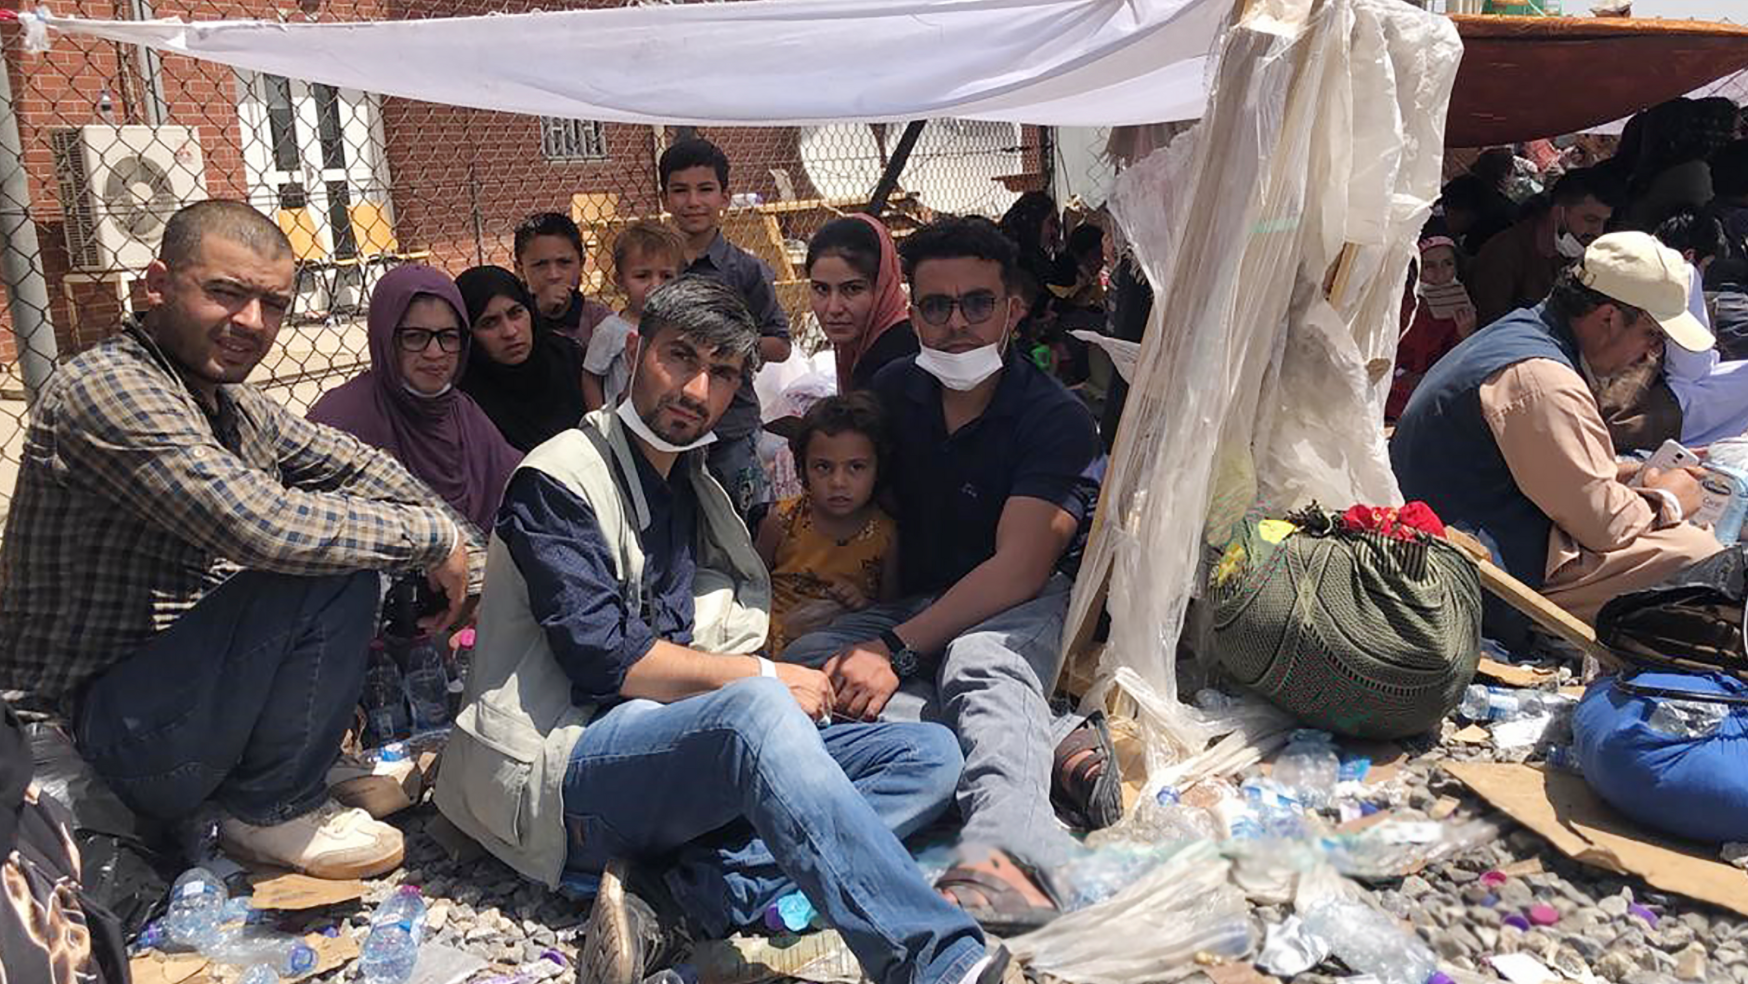 An all-ages group of people sit on the dusty ground with a makeshift tent over them